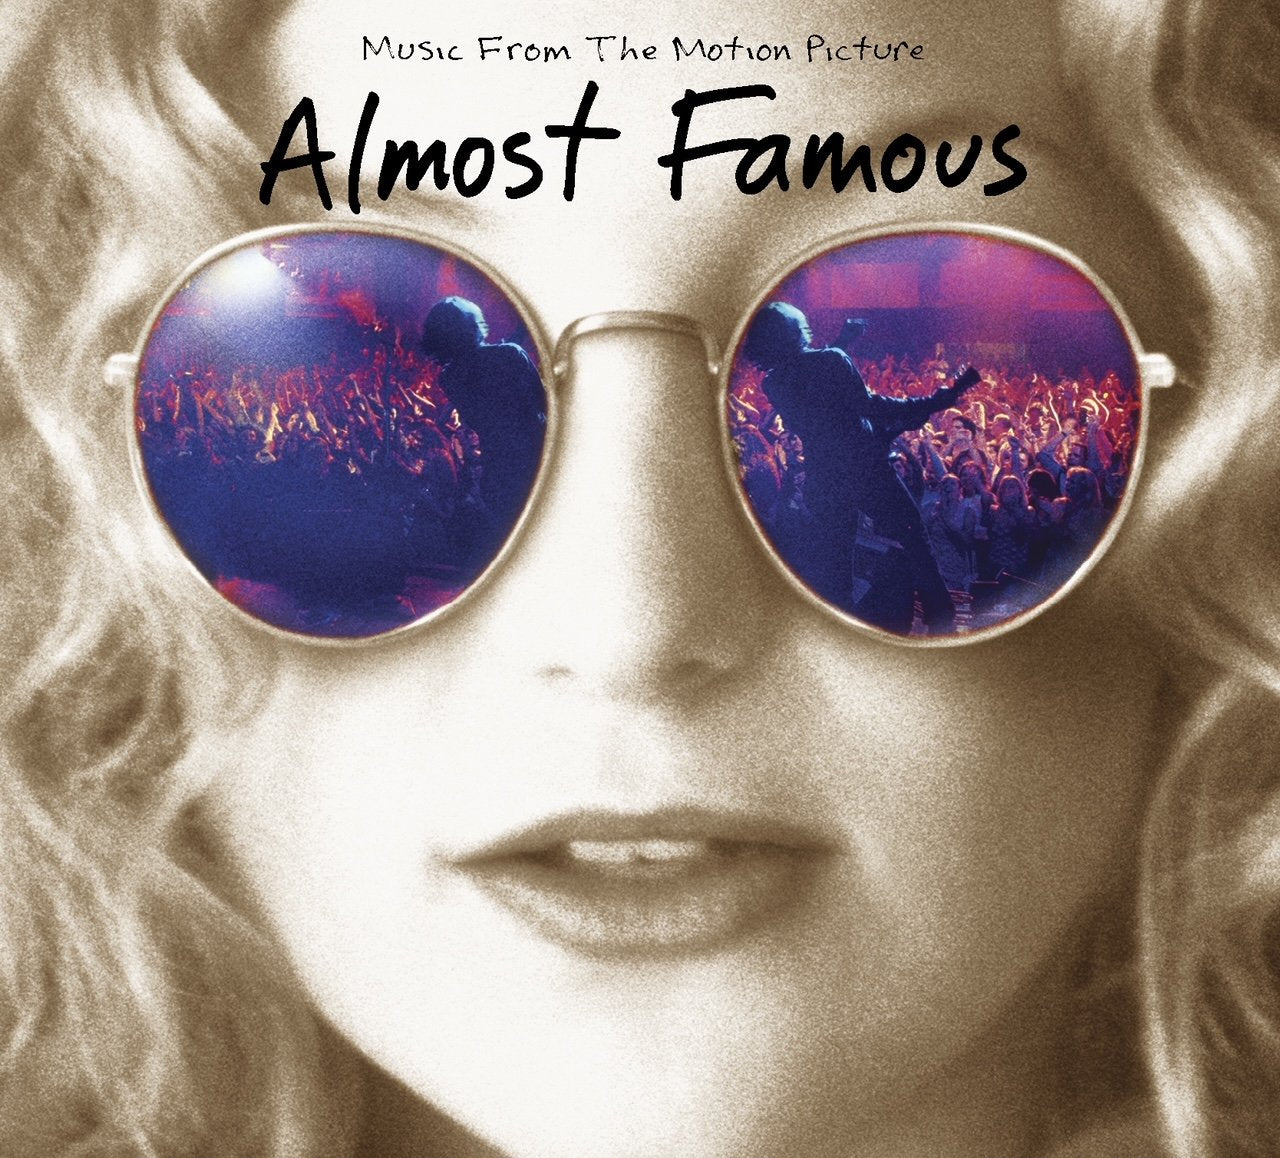 VARIOUS - Almost Famous O.S.T. (20th Anniv. Remastered Edition) - 2LP - 180g Vinyl